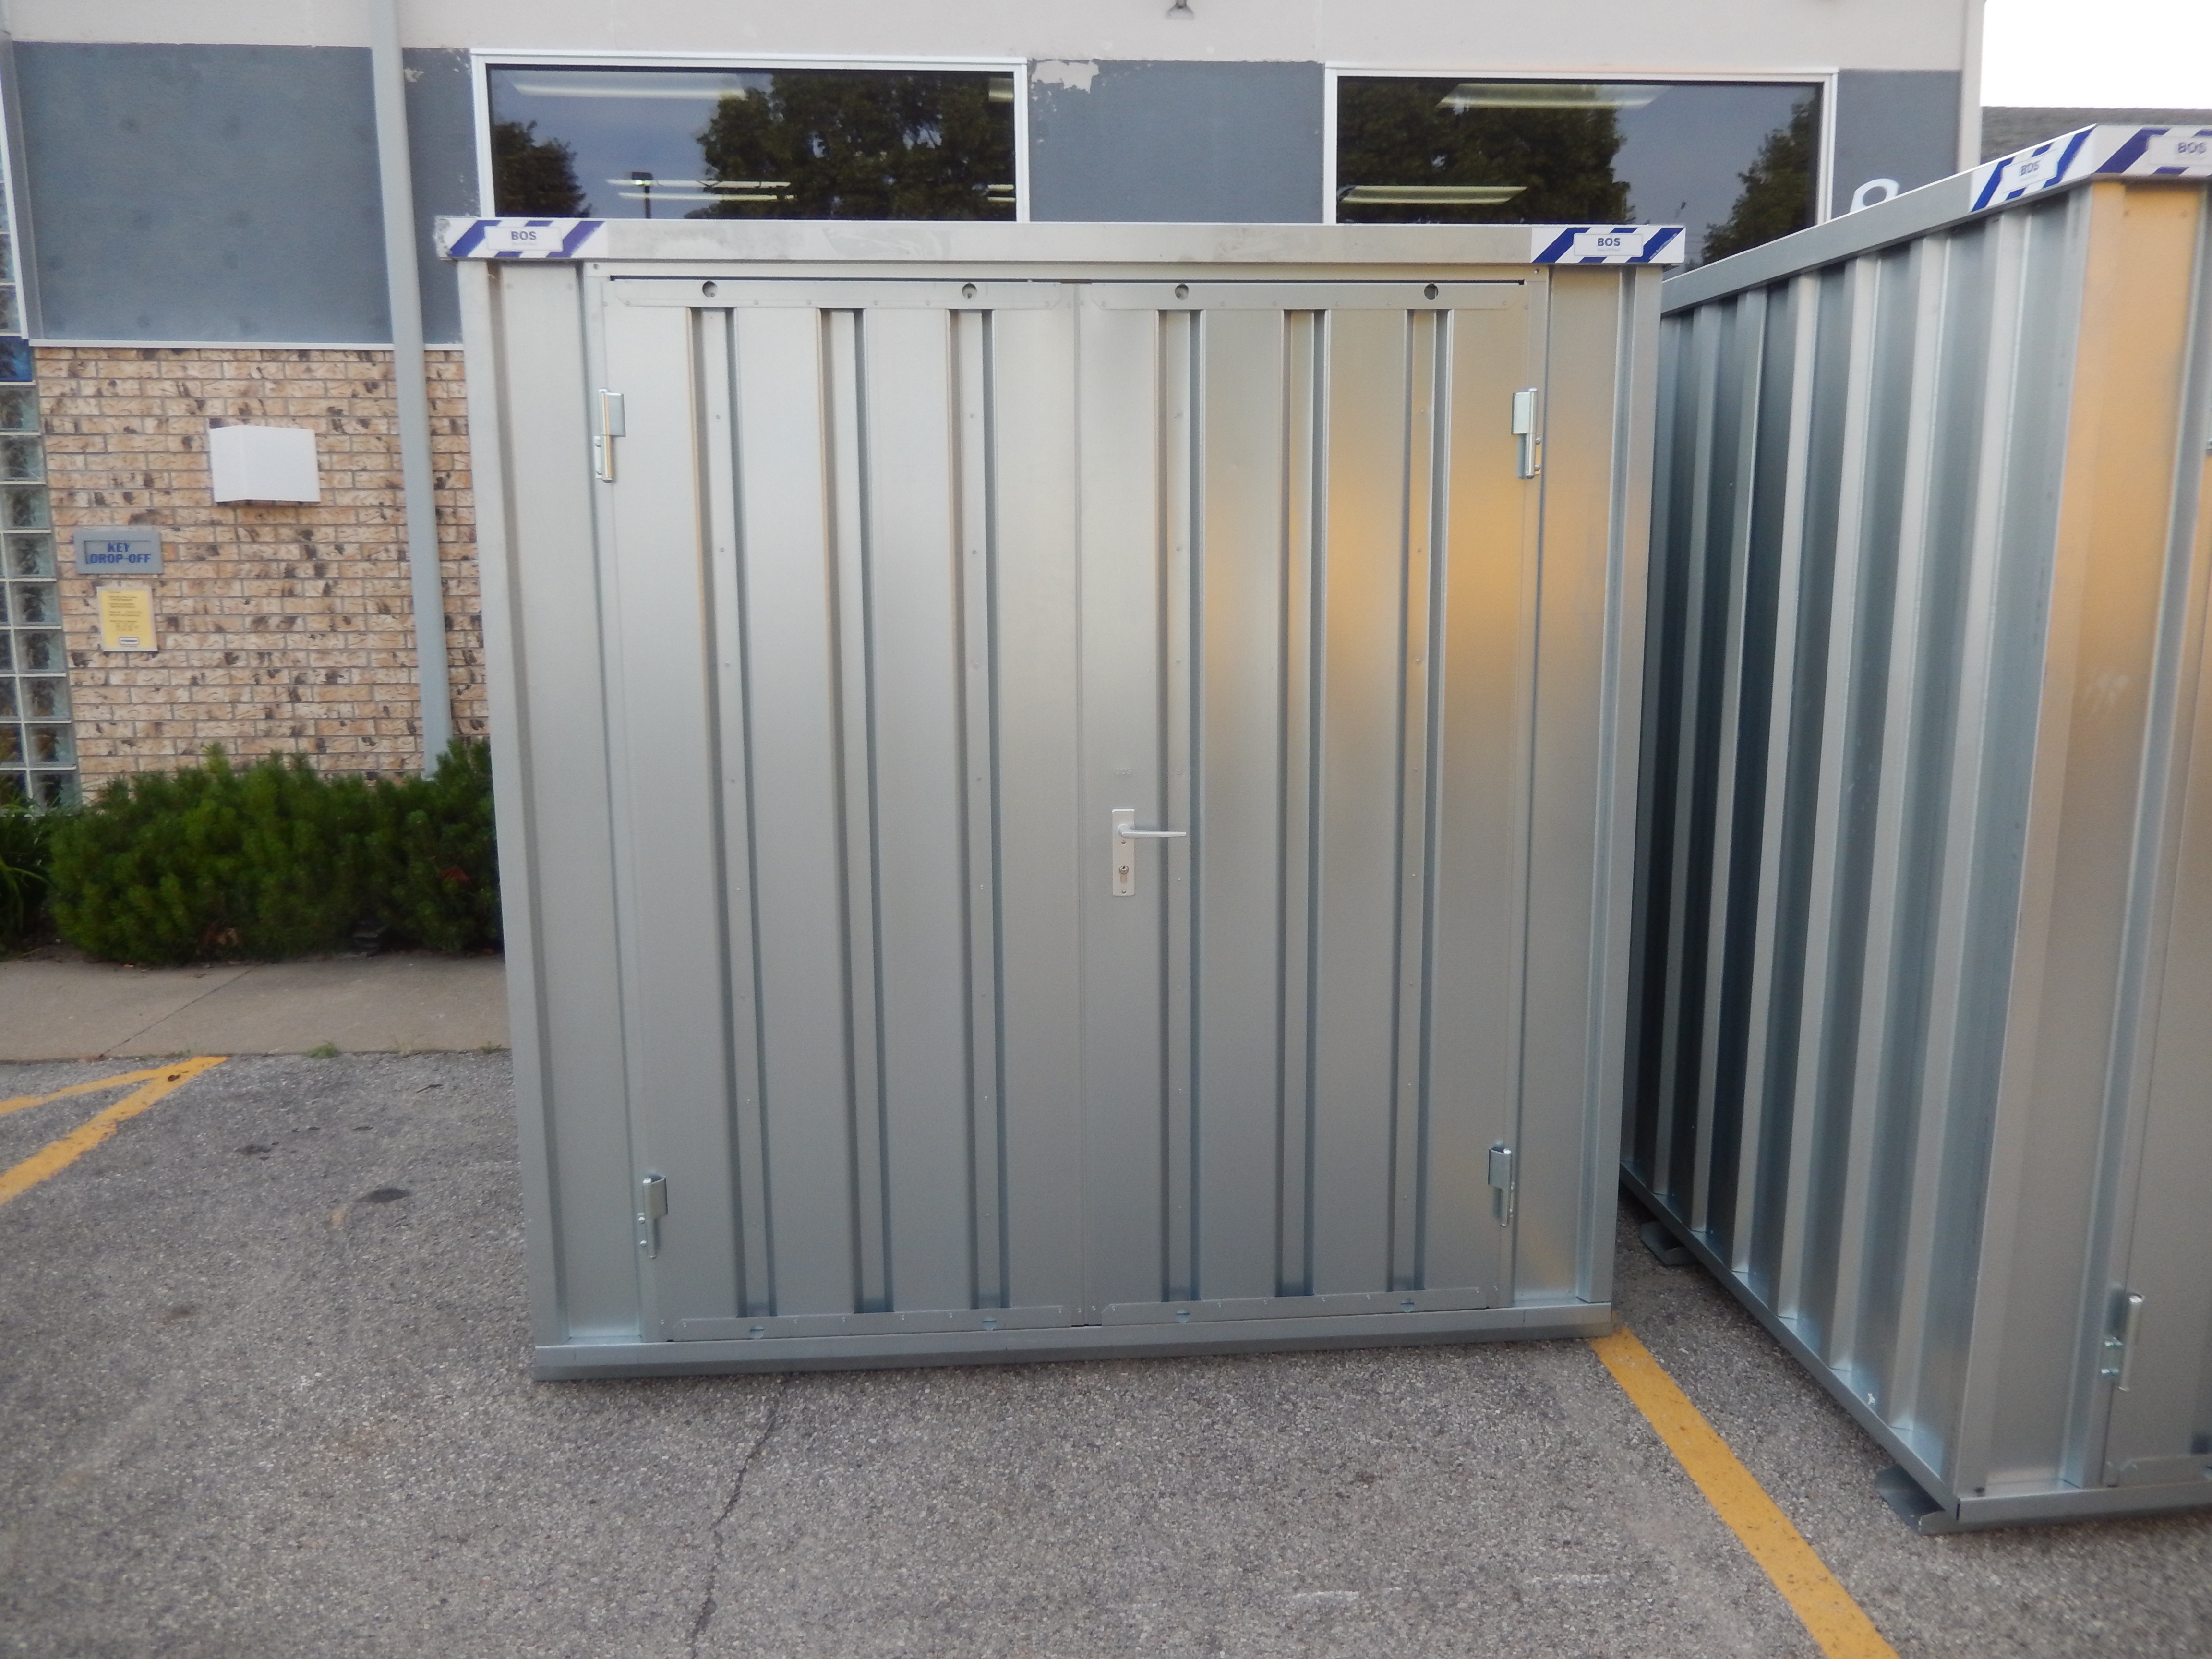 rent a storage container with doors in iowa city & cedar